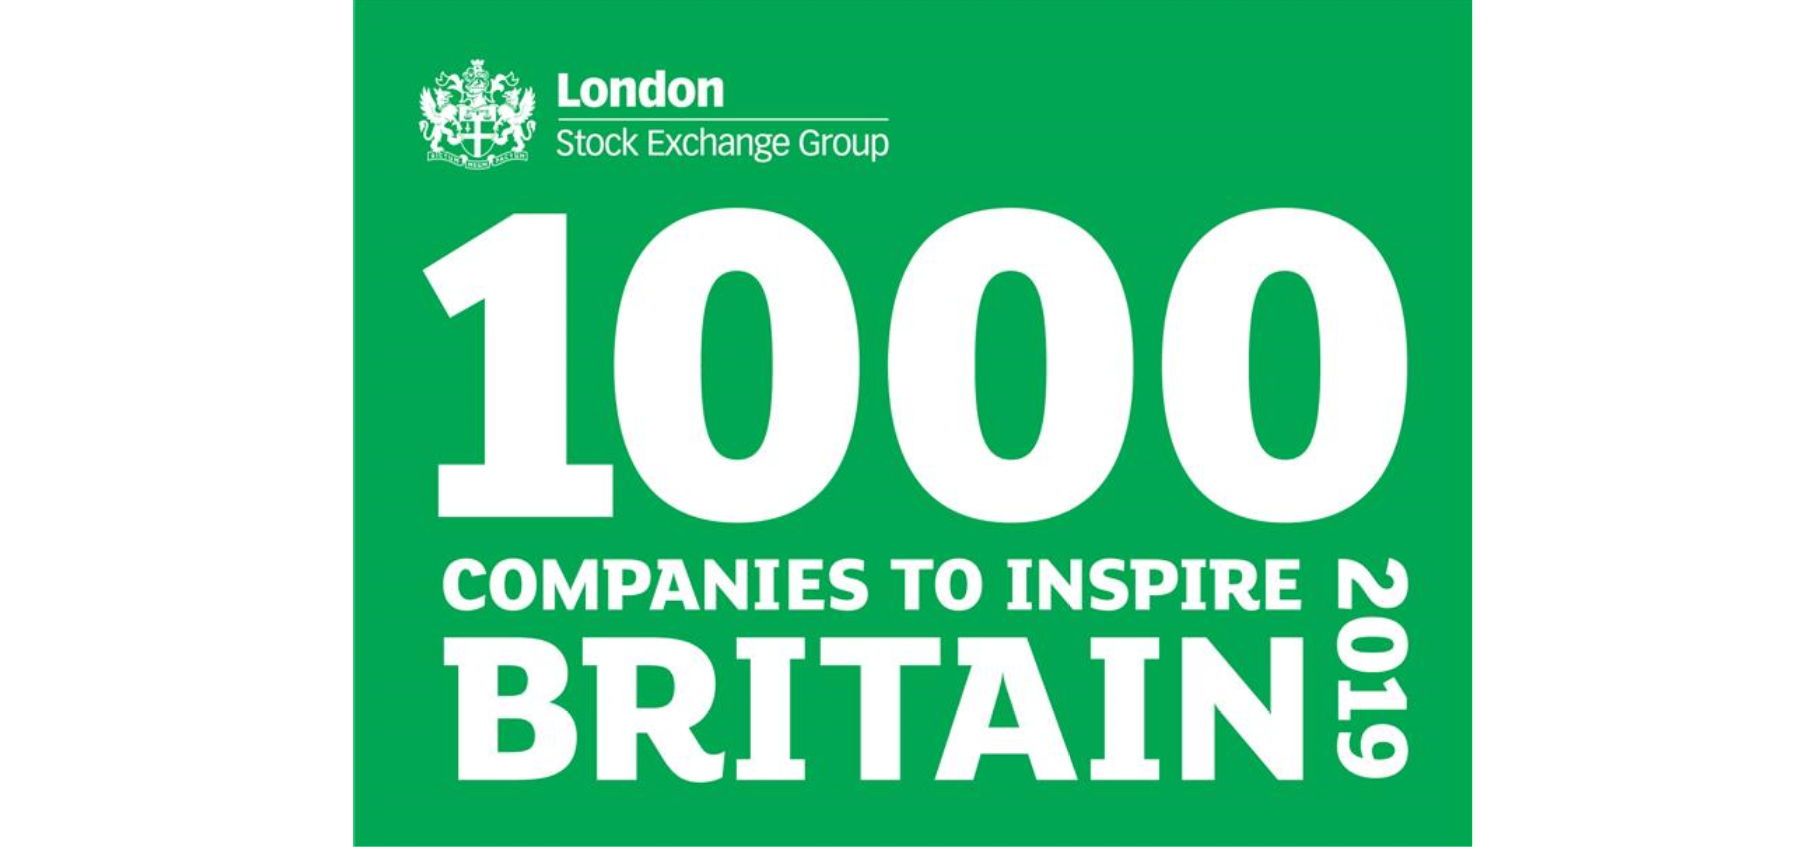 Arcus FM is named as one of ‘1000 Companies to Inspire Britain’ in 2019